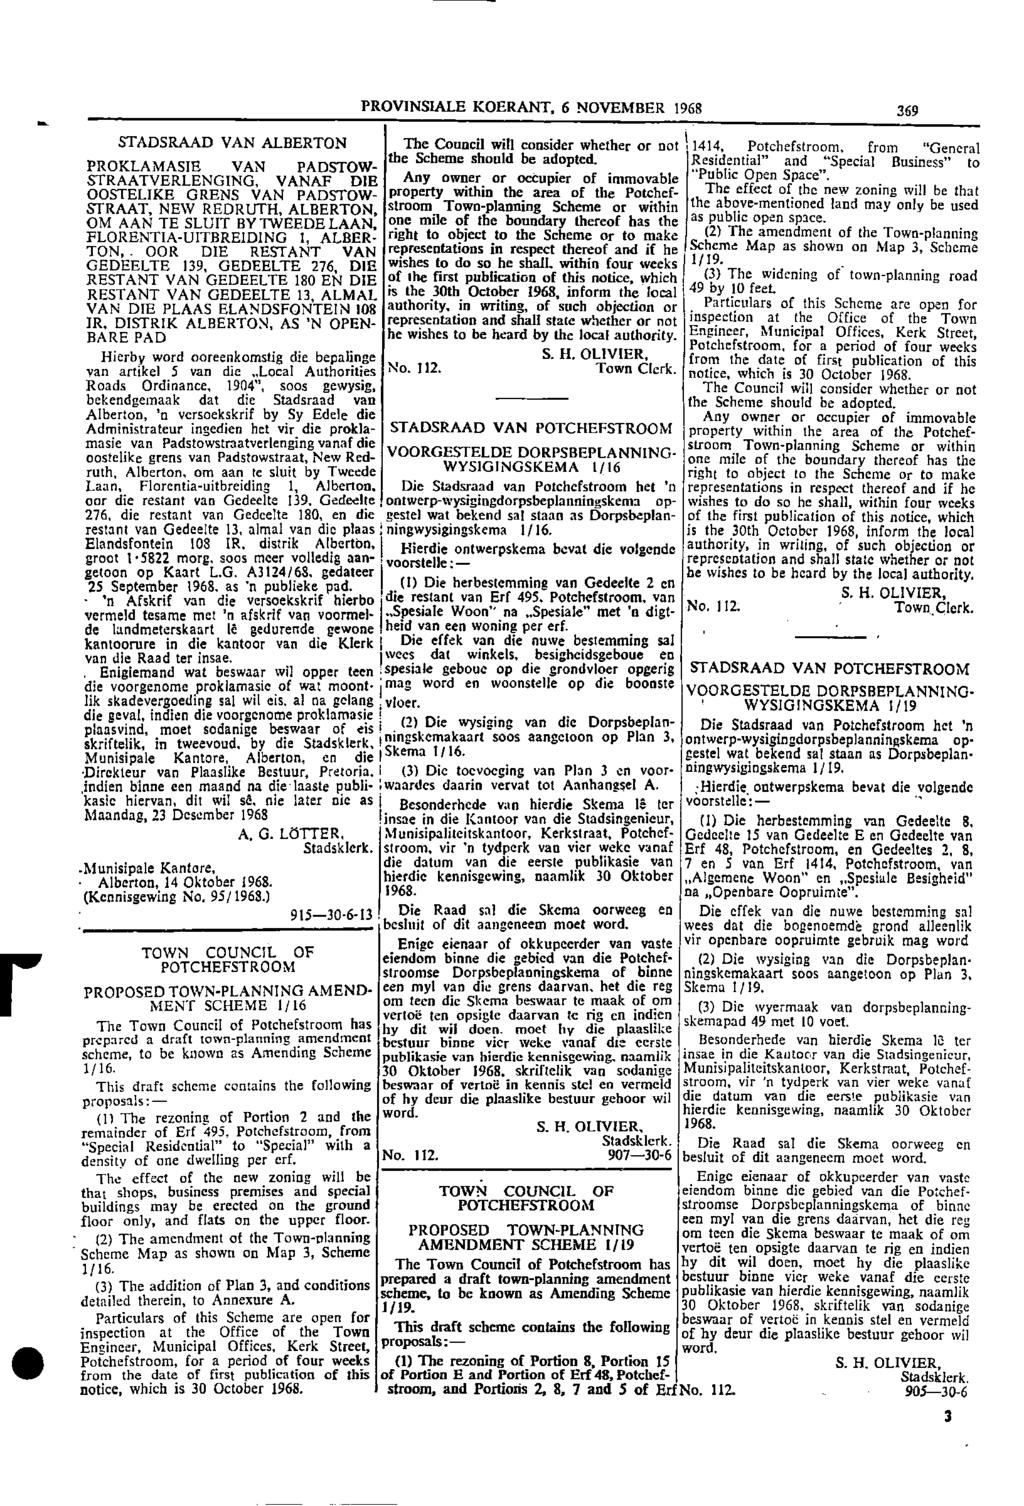 1 mag r PROVINSIALE KOERANT, 6 NOVEMBER 1968 369 1 STADSRAAD VAN ALBERTON The Council will consider whether or not I 1414, Potchefstroom, from "General the Scheme should be adopted PROKLAMASIE VAN